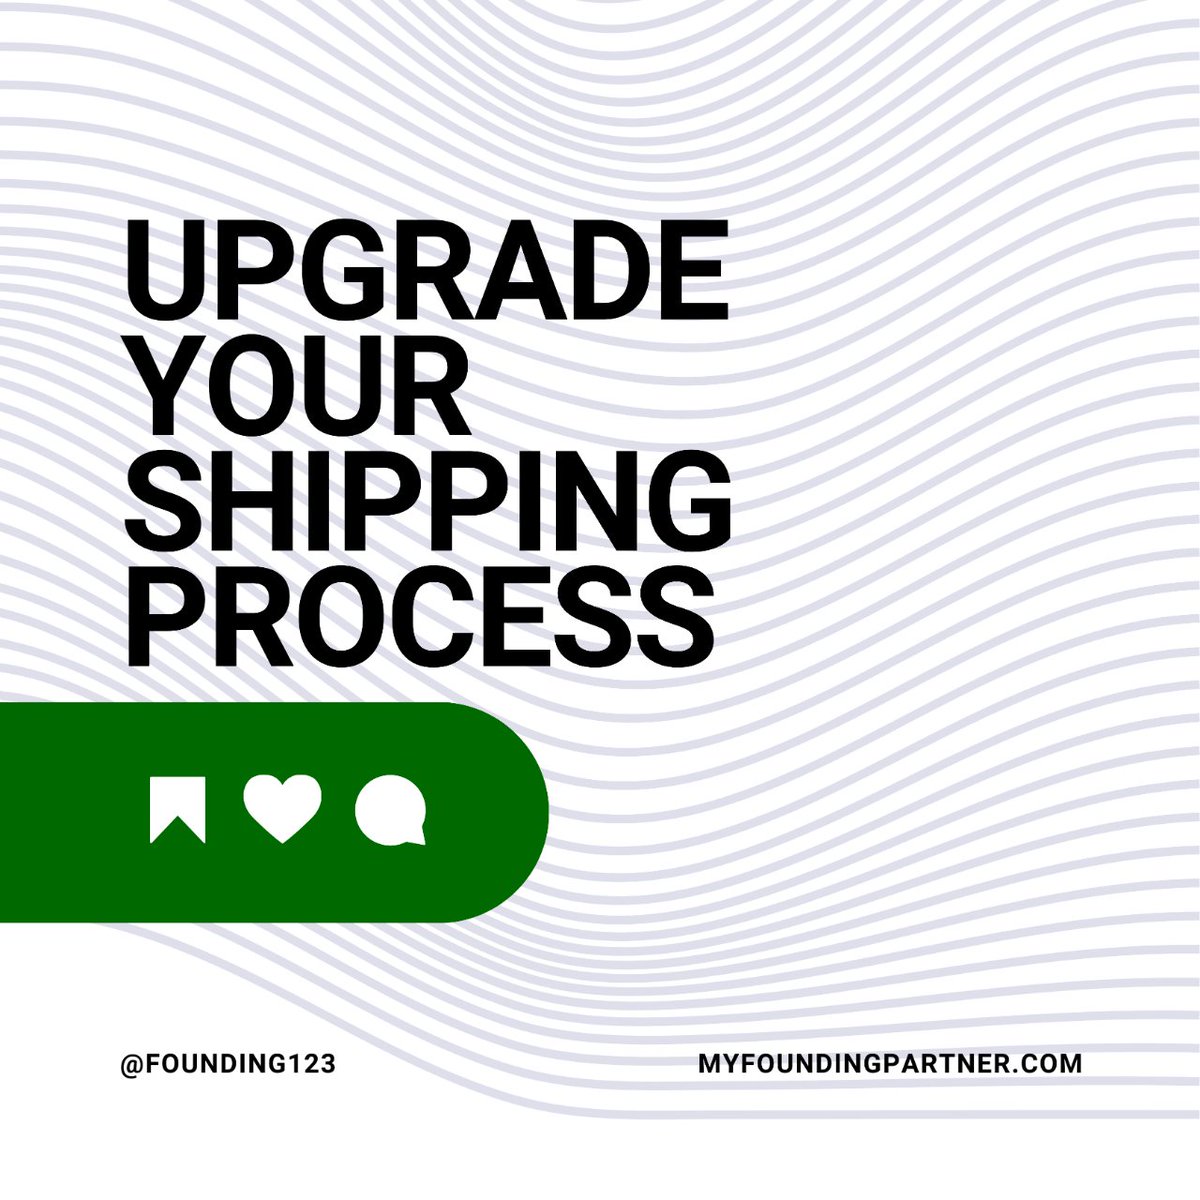 Simplify shipping with methods like USPS Click-N-Ship & ROLLO. Enhance efficiency and satisfaction. 📦

#EcommerceTips #ShippingSolutions #MFP #BeAFounder #MFPartnerQA